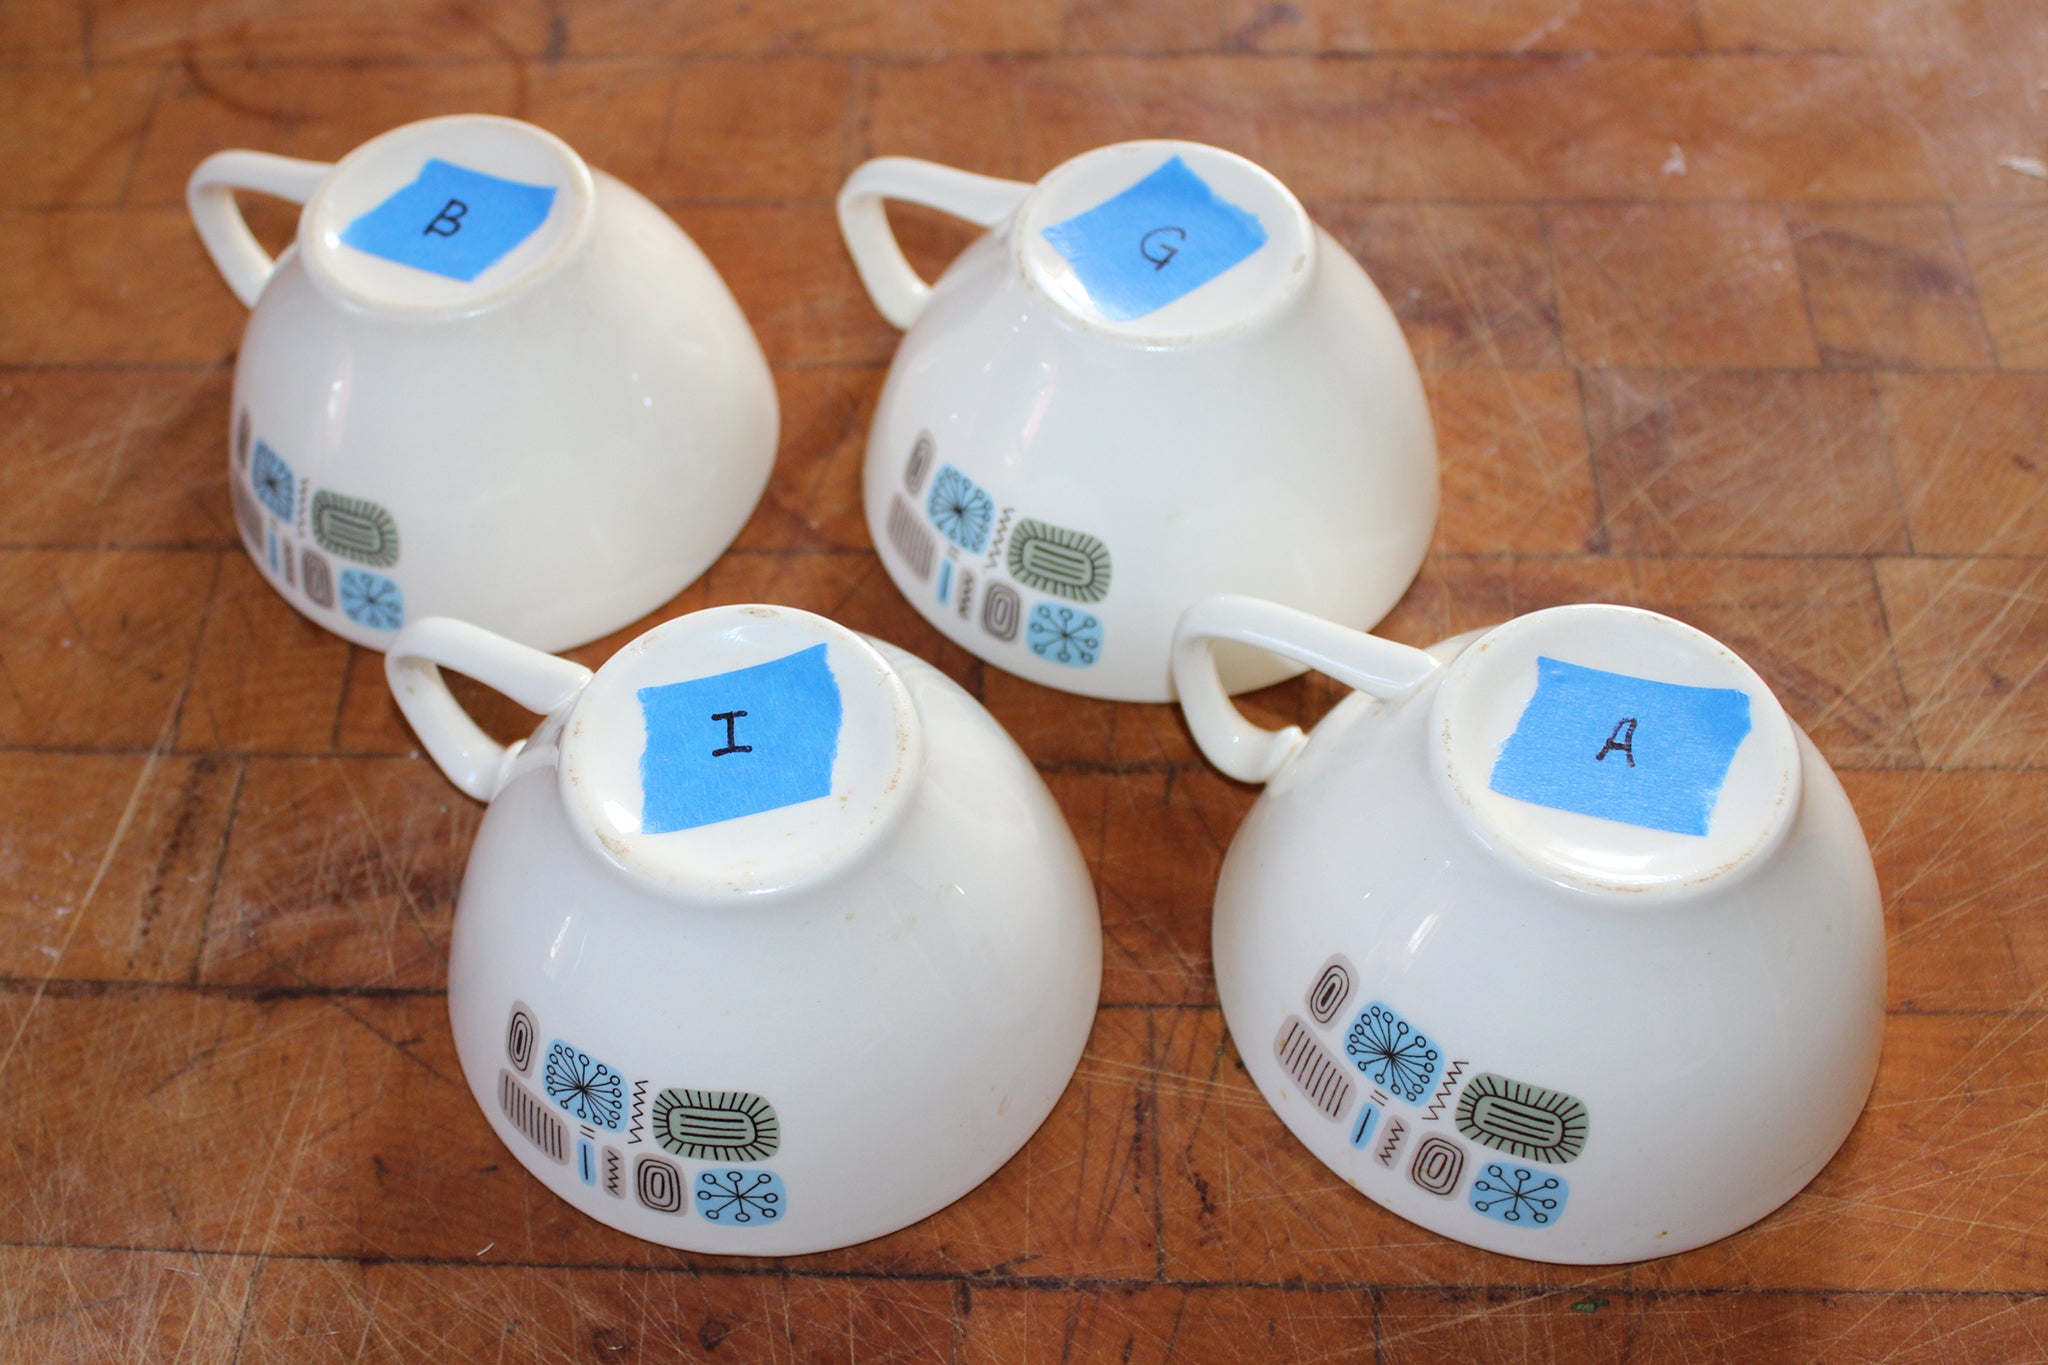 Four porcelain coffee cups sit upside down on a table. They are each labeled with a different letter on blue painter's tape.